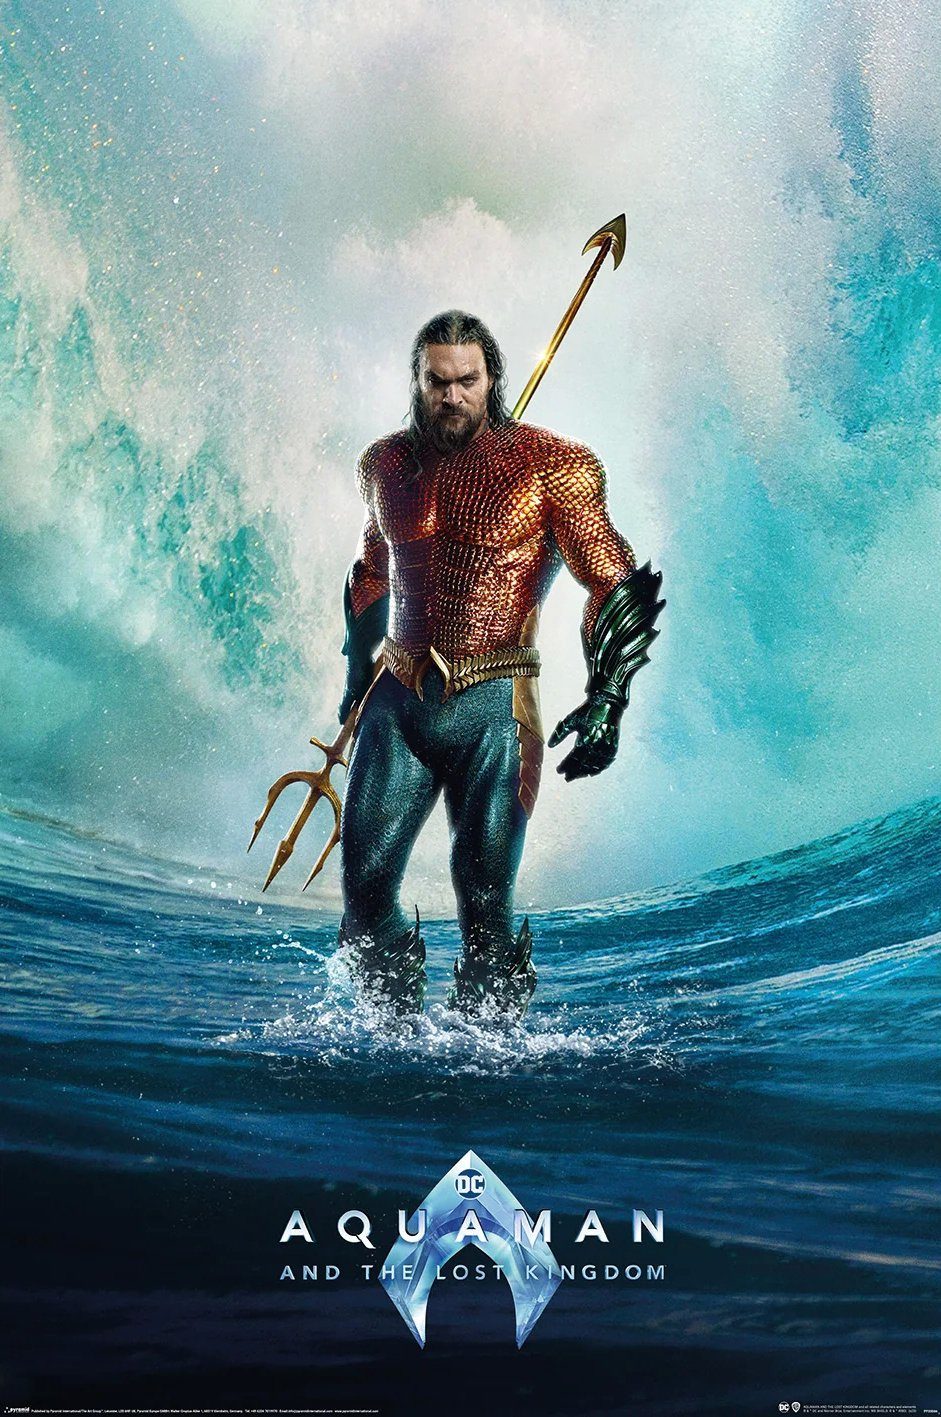 PYRAMID Poster Aquaman Poster And The Lost Kingdom 61 x 91,5 cm | Poster